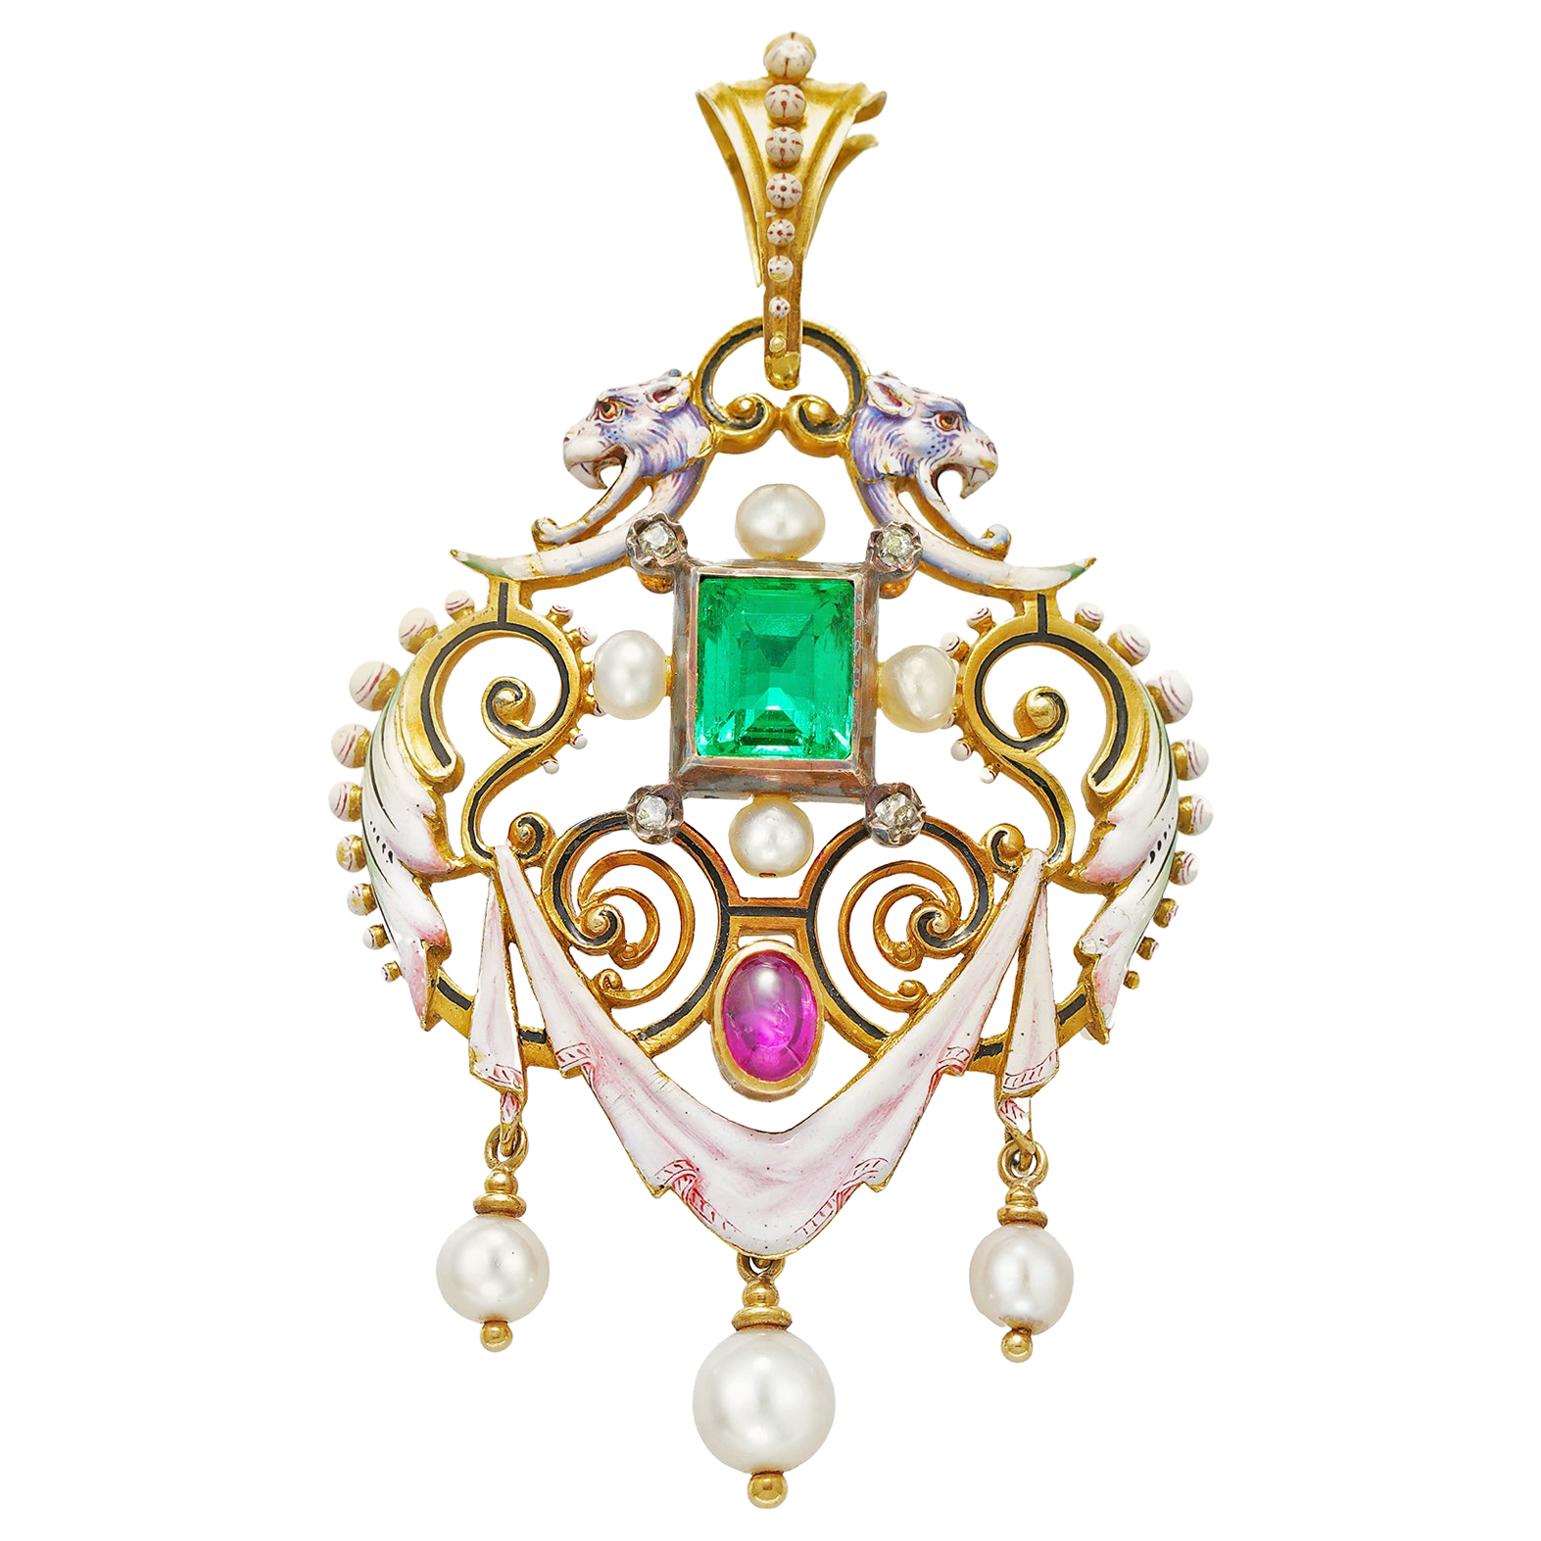 Renaissance Revival Emerald, Ruby and Pearl Pendant